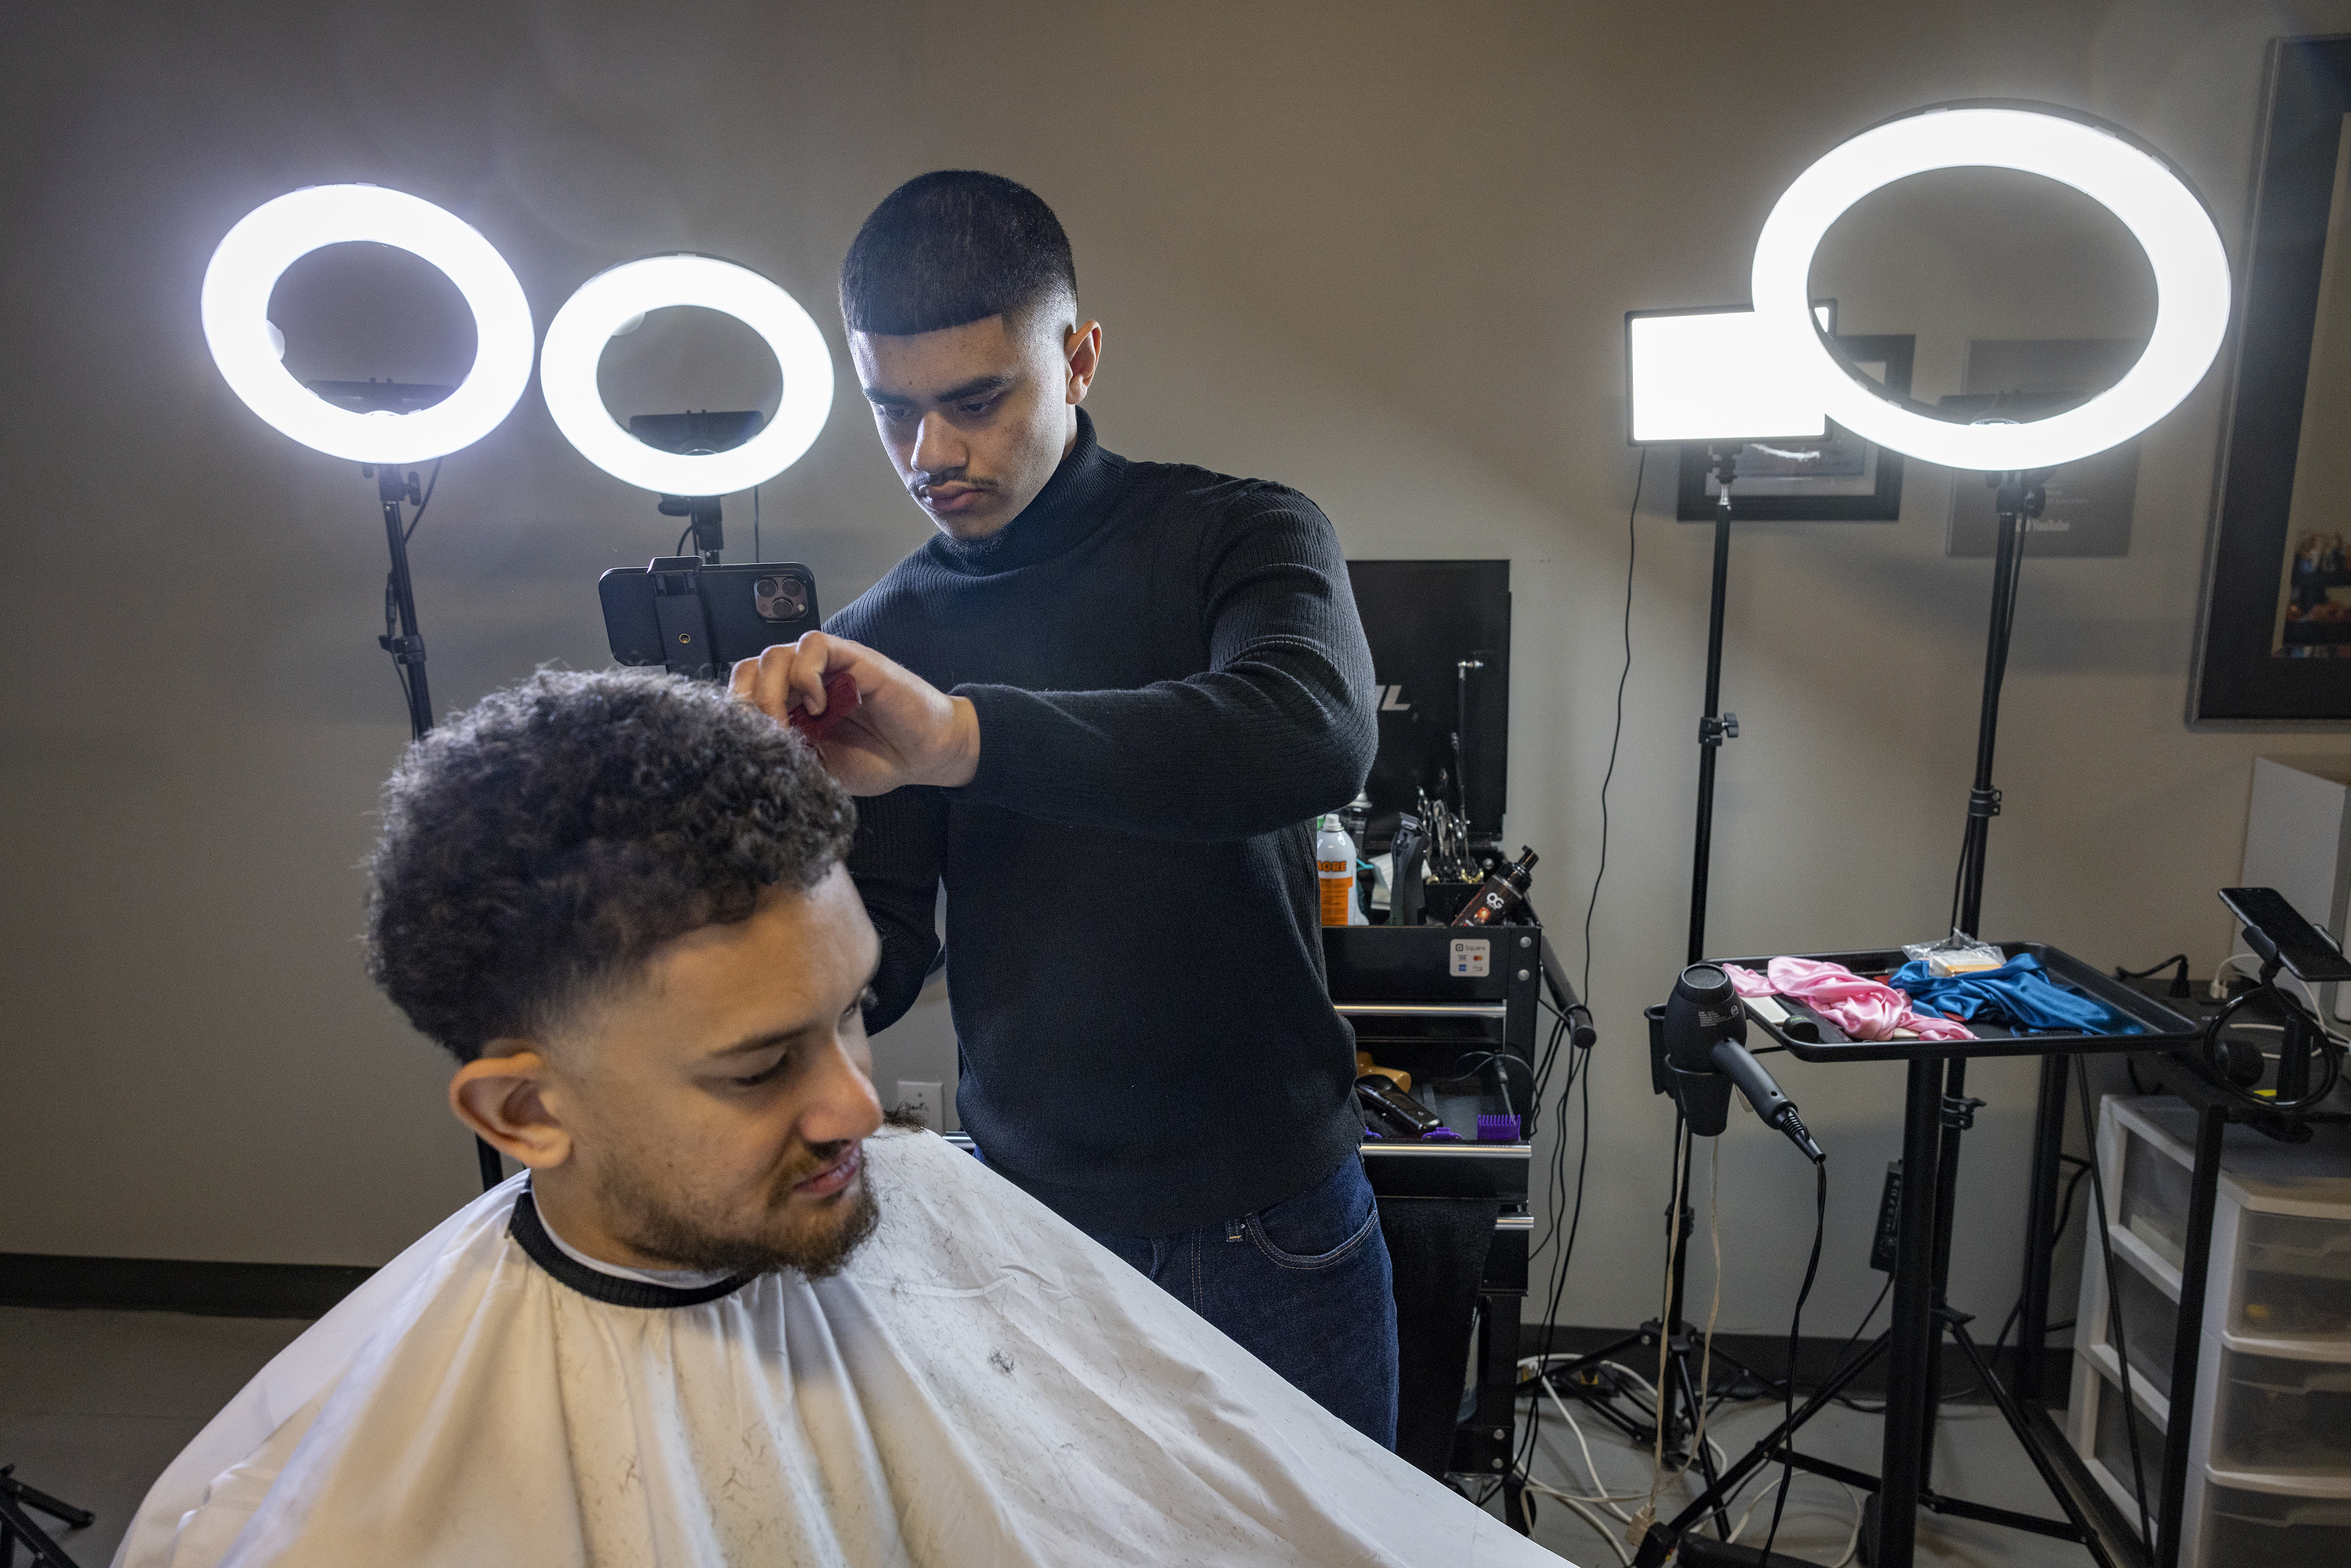 Why are men's haircuts so expensive in Philadelphia?